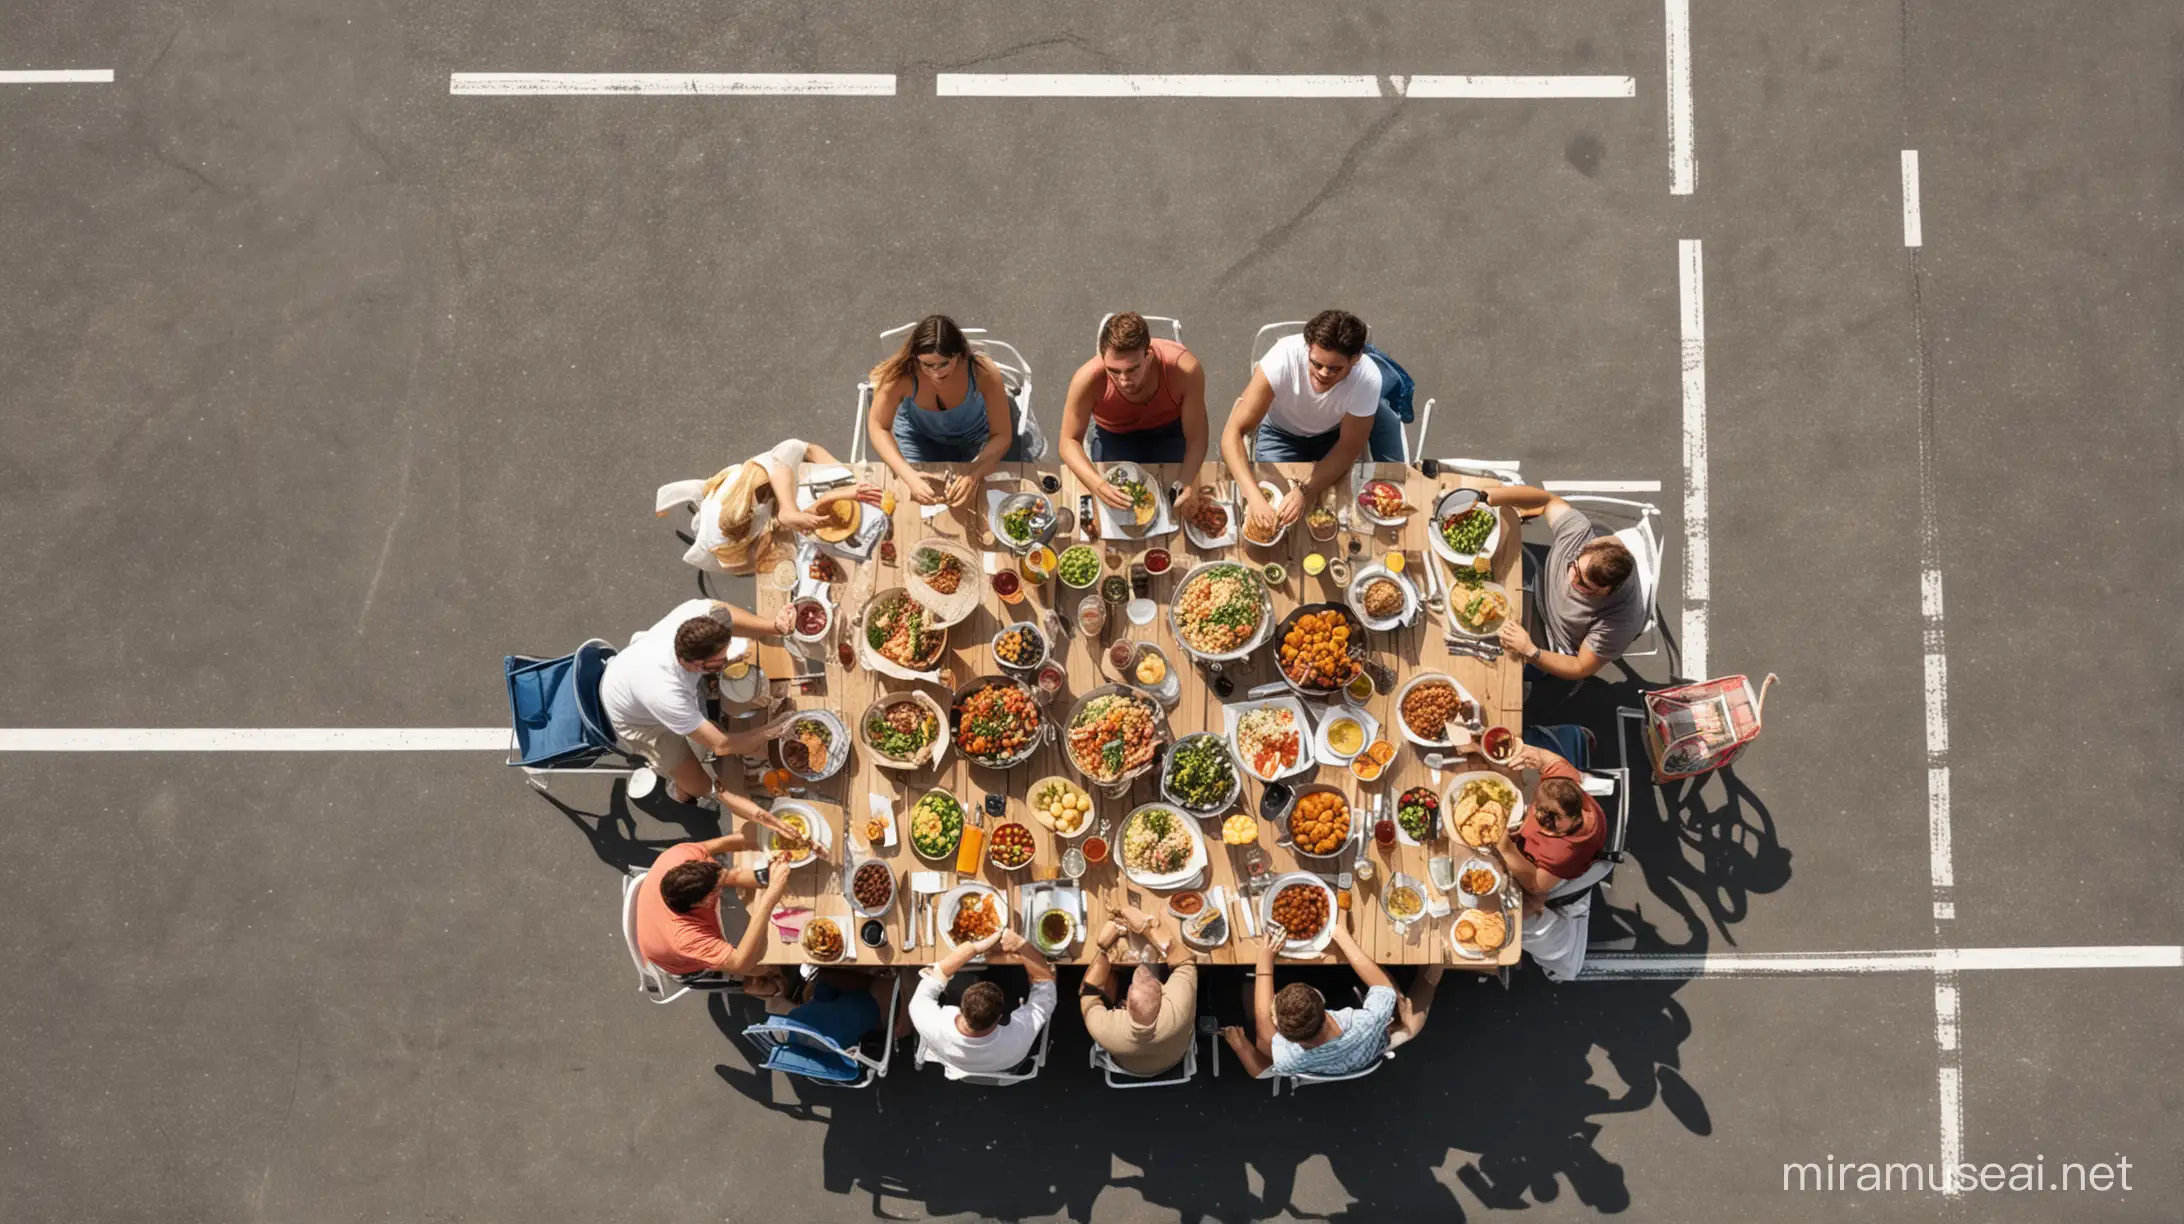 people having lunch sitting at a table, which is situated on the asphalt of a car racetrack. It is summer and all the people on the picture are happy and smiling